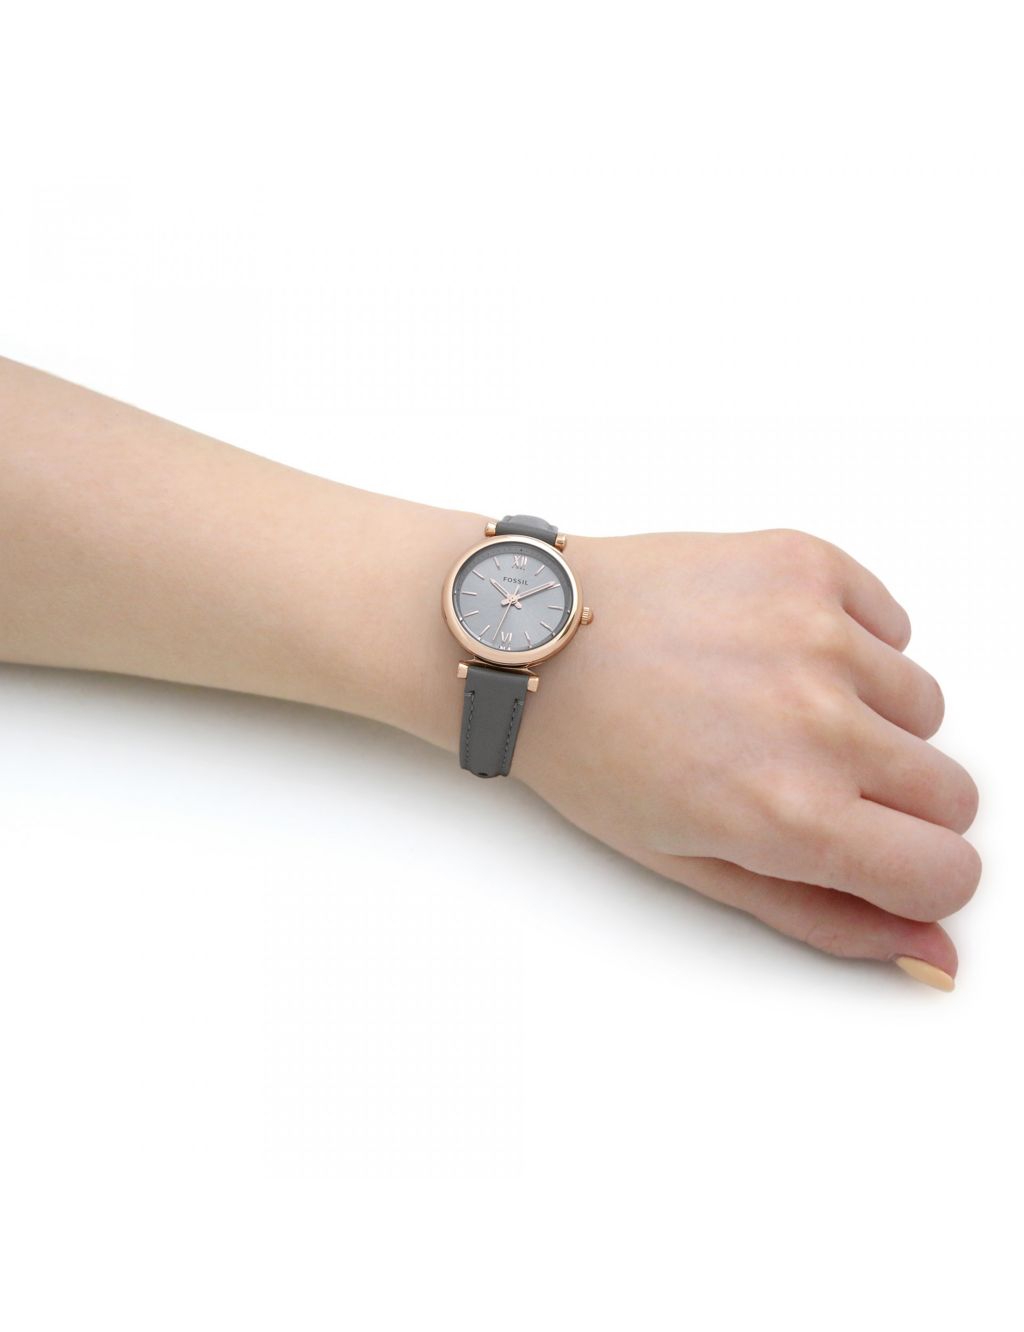 Fossil Carlie Grey Leather Watch image 2